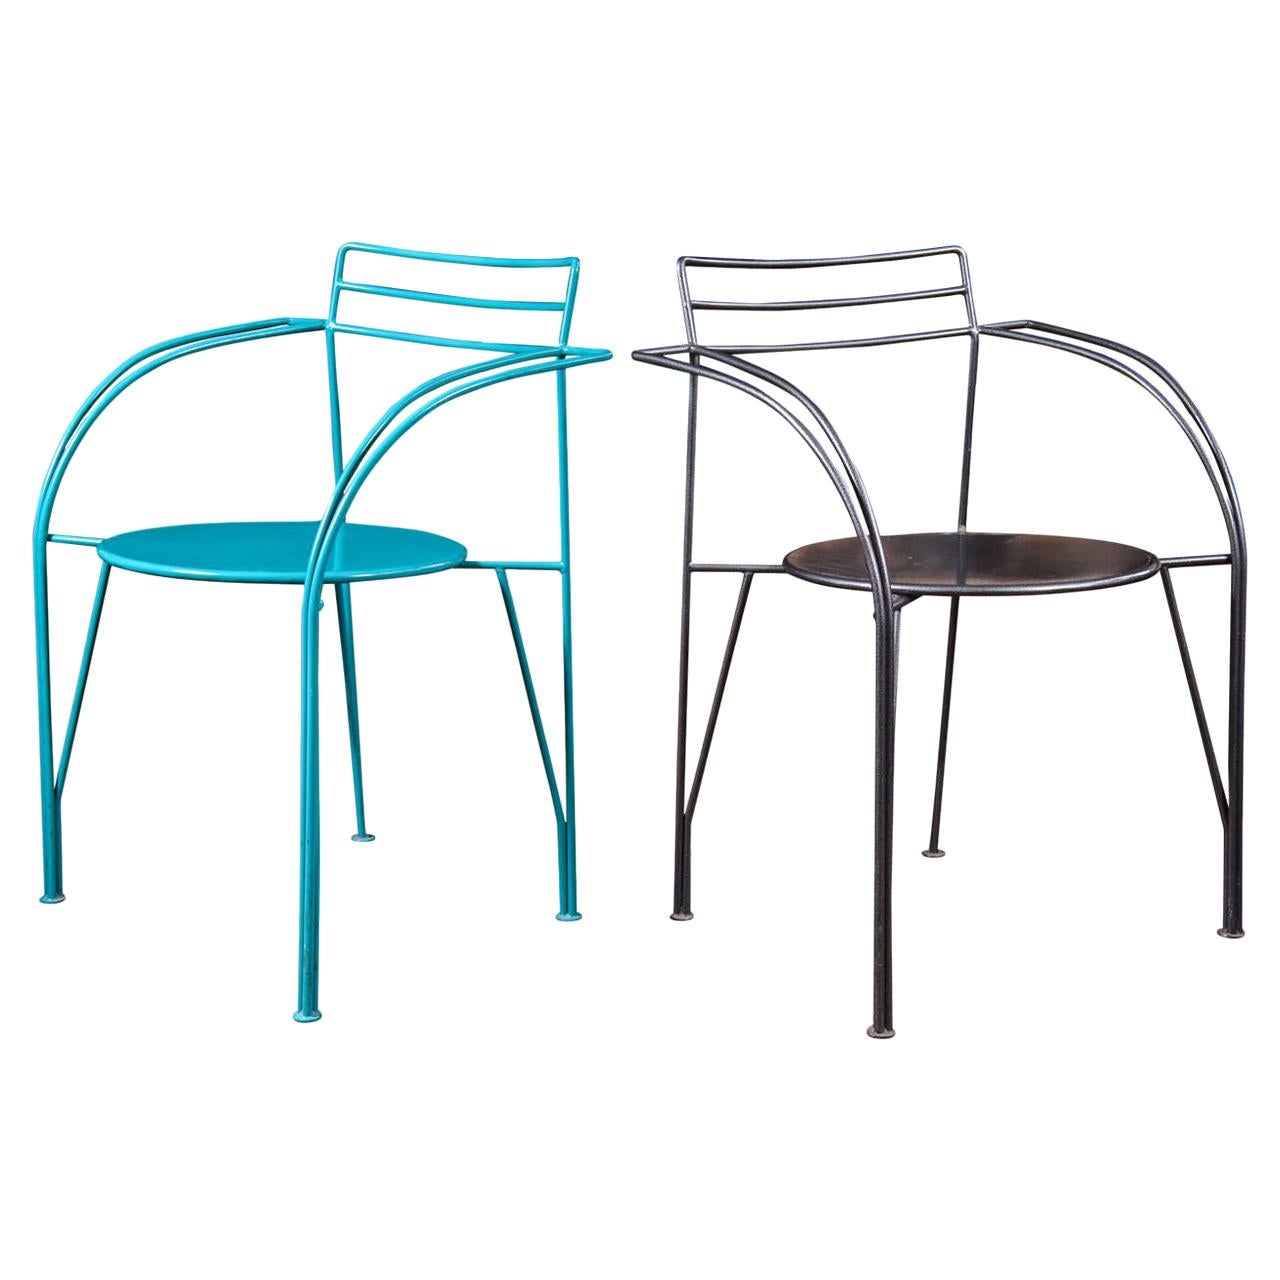 Two Powder-Coated Lune d'Argent Metal Armchairs For Sale